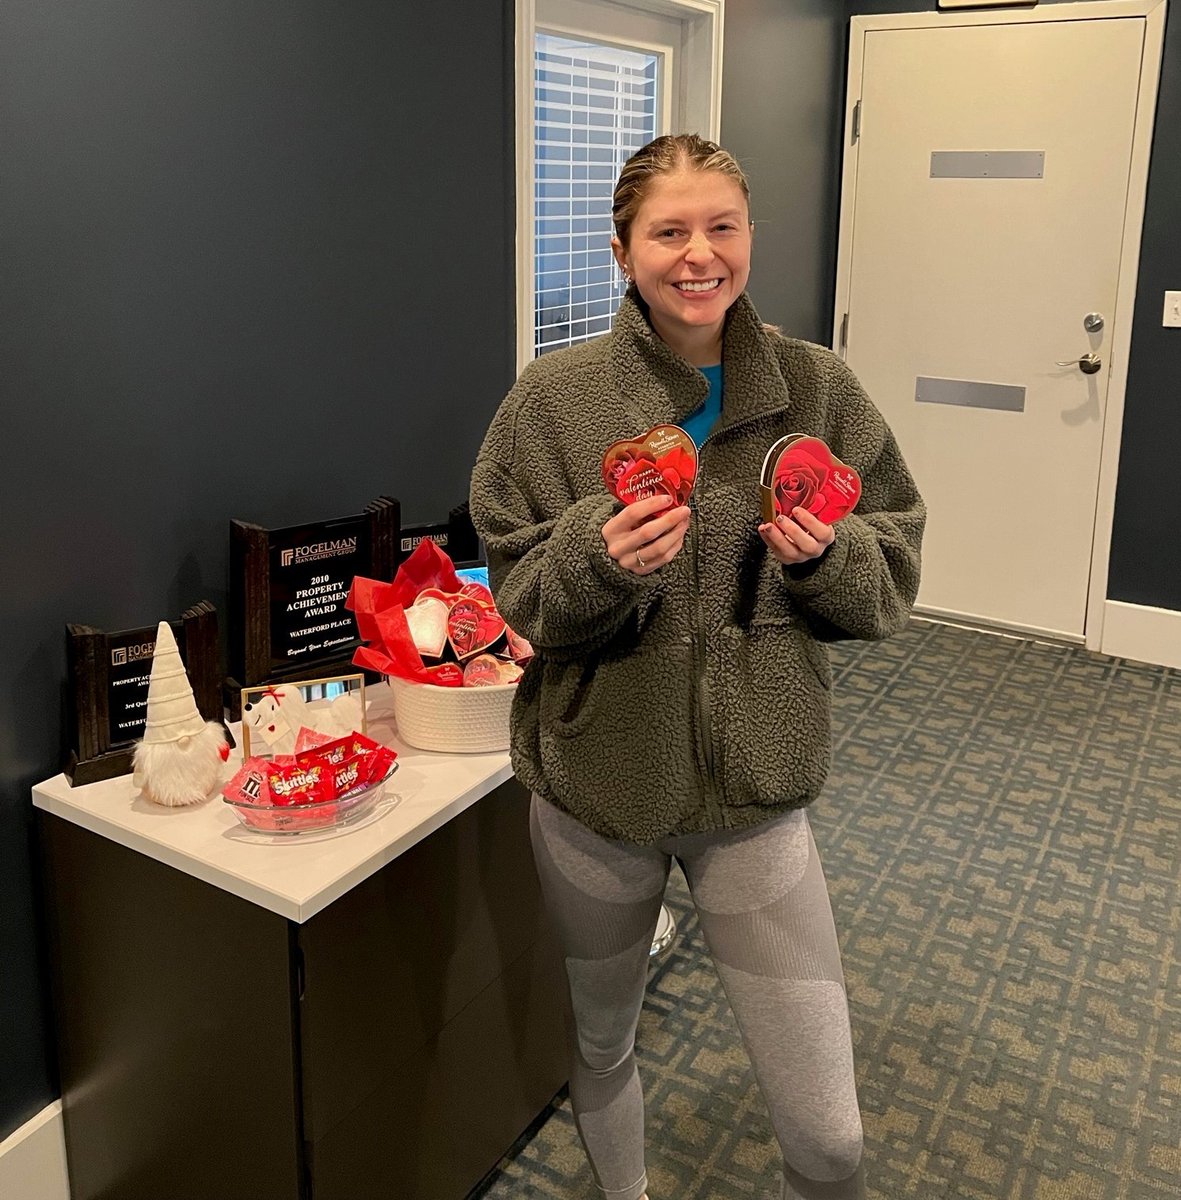 Resident Spotlight!
Waterford Place is so glad to have so many amazing residents! Thank you to everyone who stopped by the office this past week!
#ValentinesDay #WeLoveOurResidents #LoveWhereYouLive #TogetherKY #FogelmanProperties #FogelmanCares #WaterfordPlaceApartments...